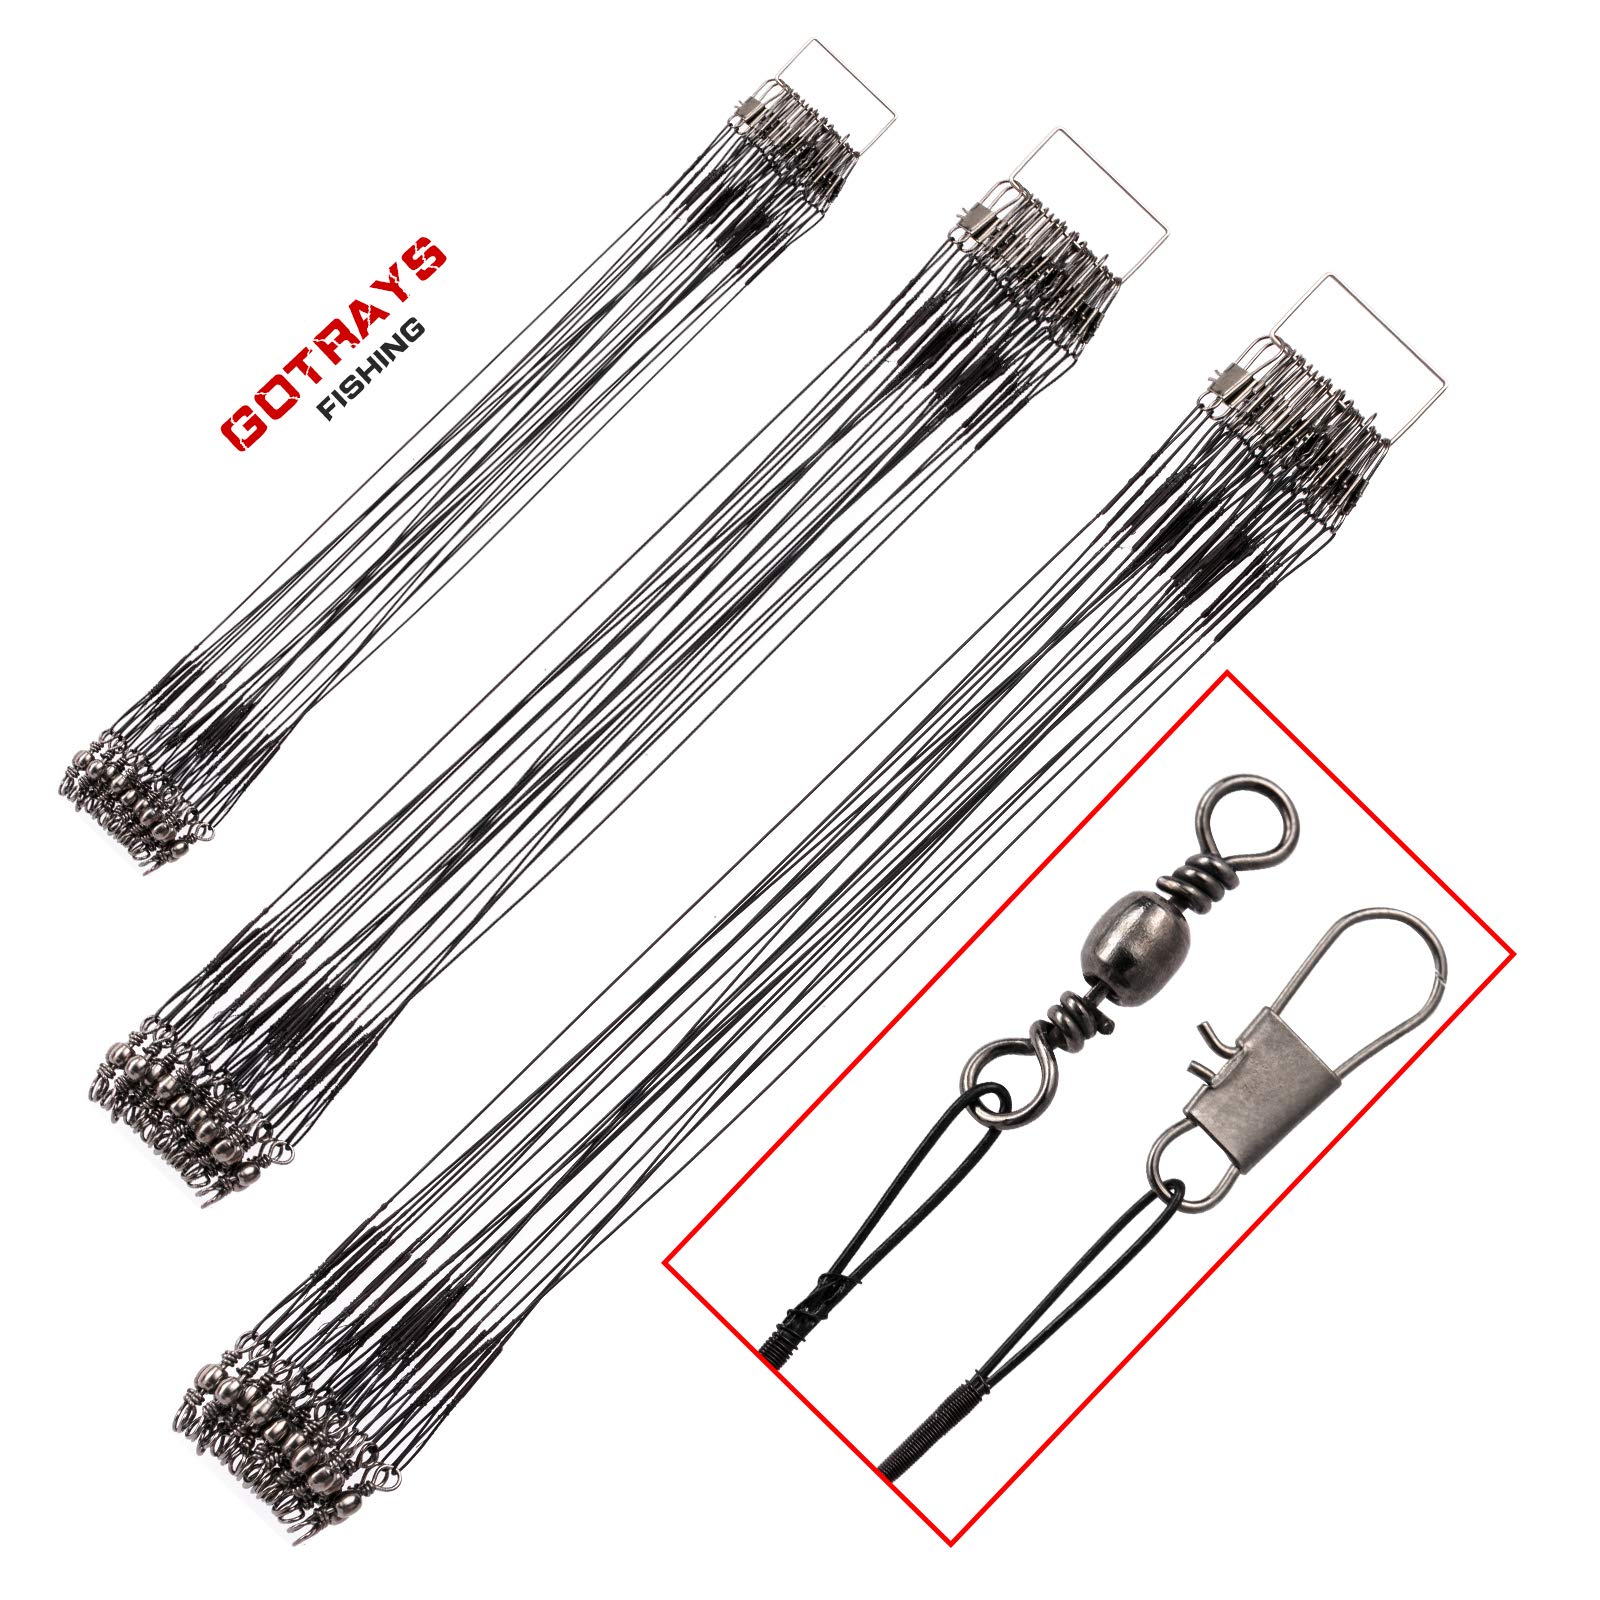 GOTRAYS Fishing Leaders, Fishing Leader Line Stainless Steel Wire with  Swivels Snap for Lures or Hooks, Steel Leader Fishing for Saltwater  Freshwater, Fishing Wire Leader 60Pcs/Package 